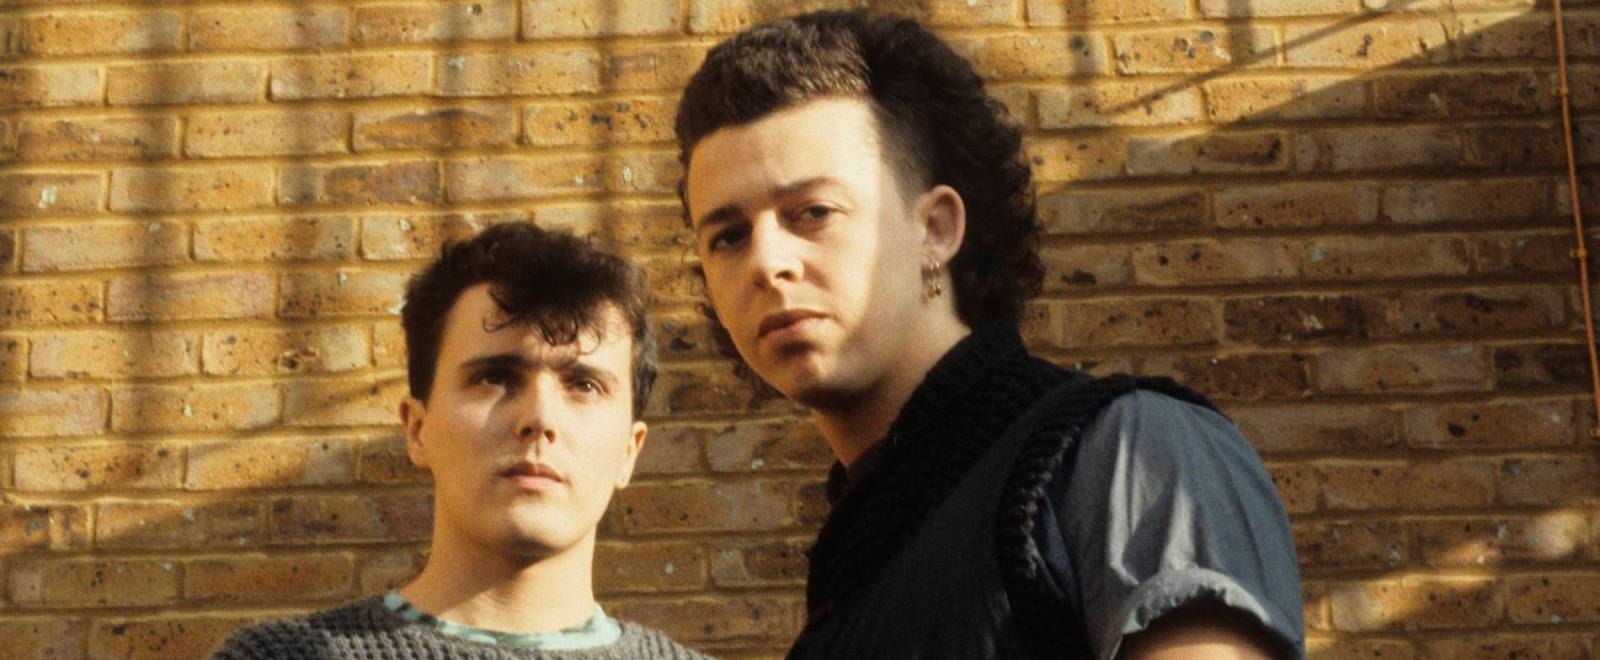 Tears for Fears – Roland & Curt Interviewed